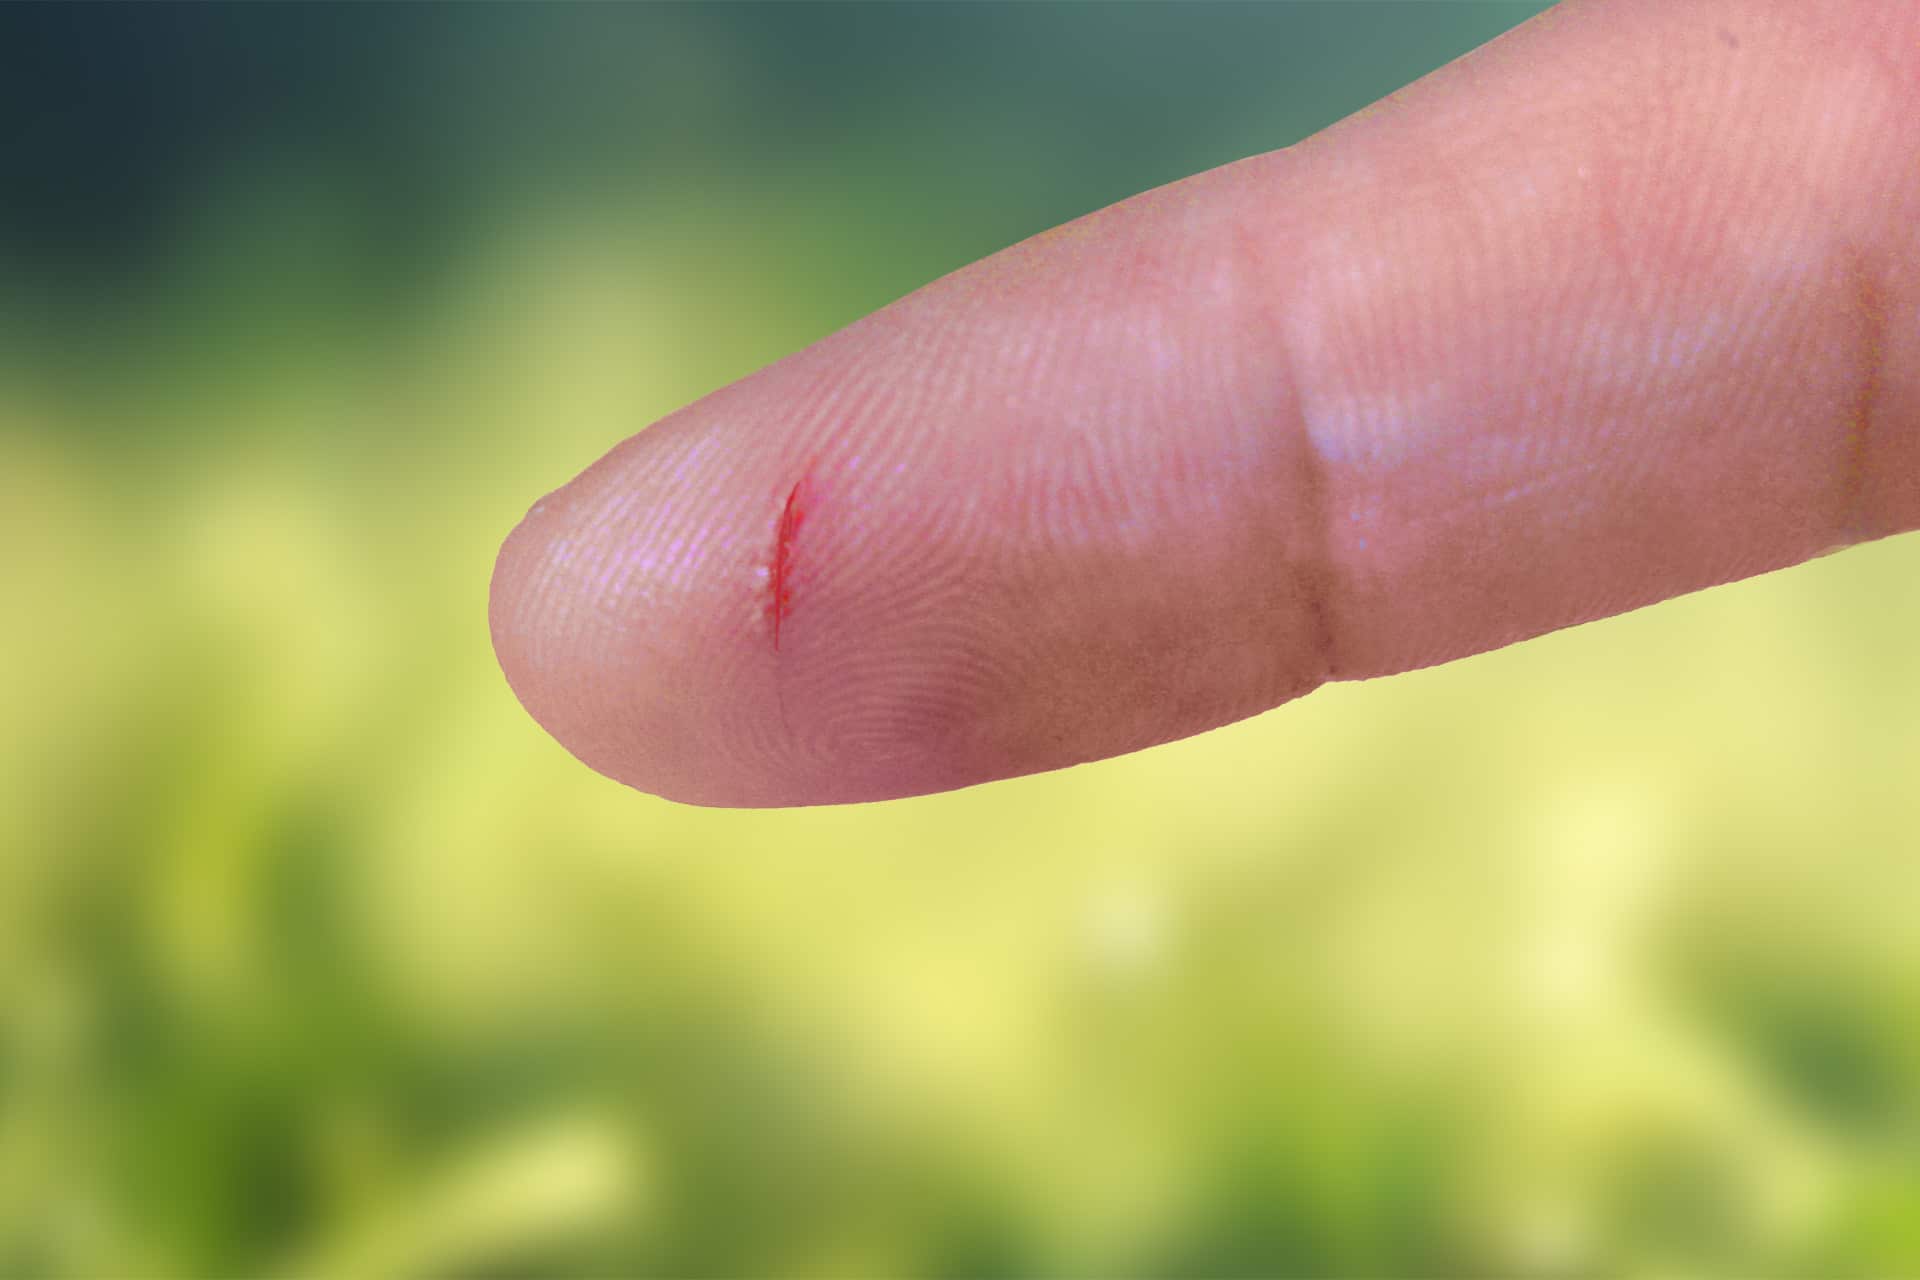 STOP Using Super Glue on Your Cuts and Cracked Skin!